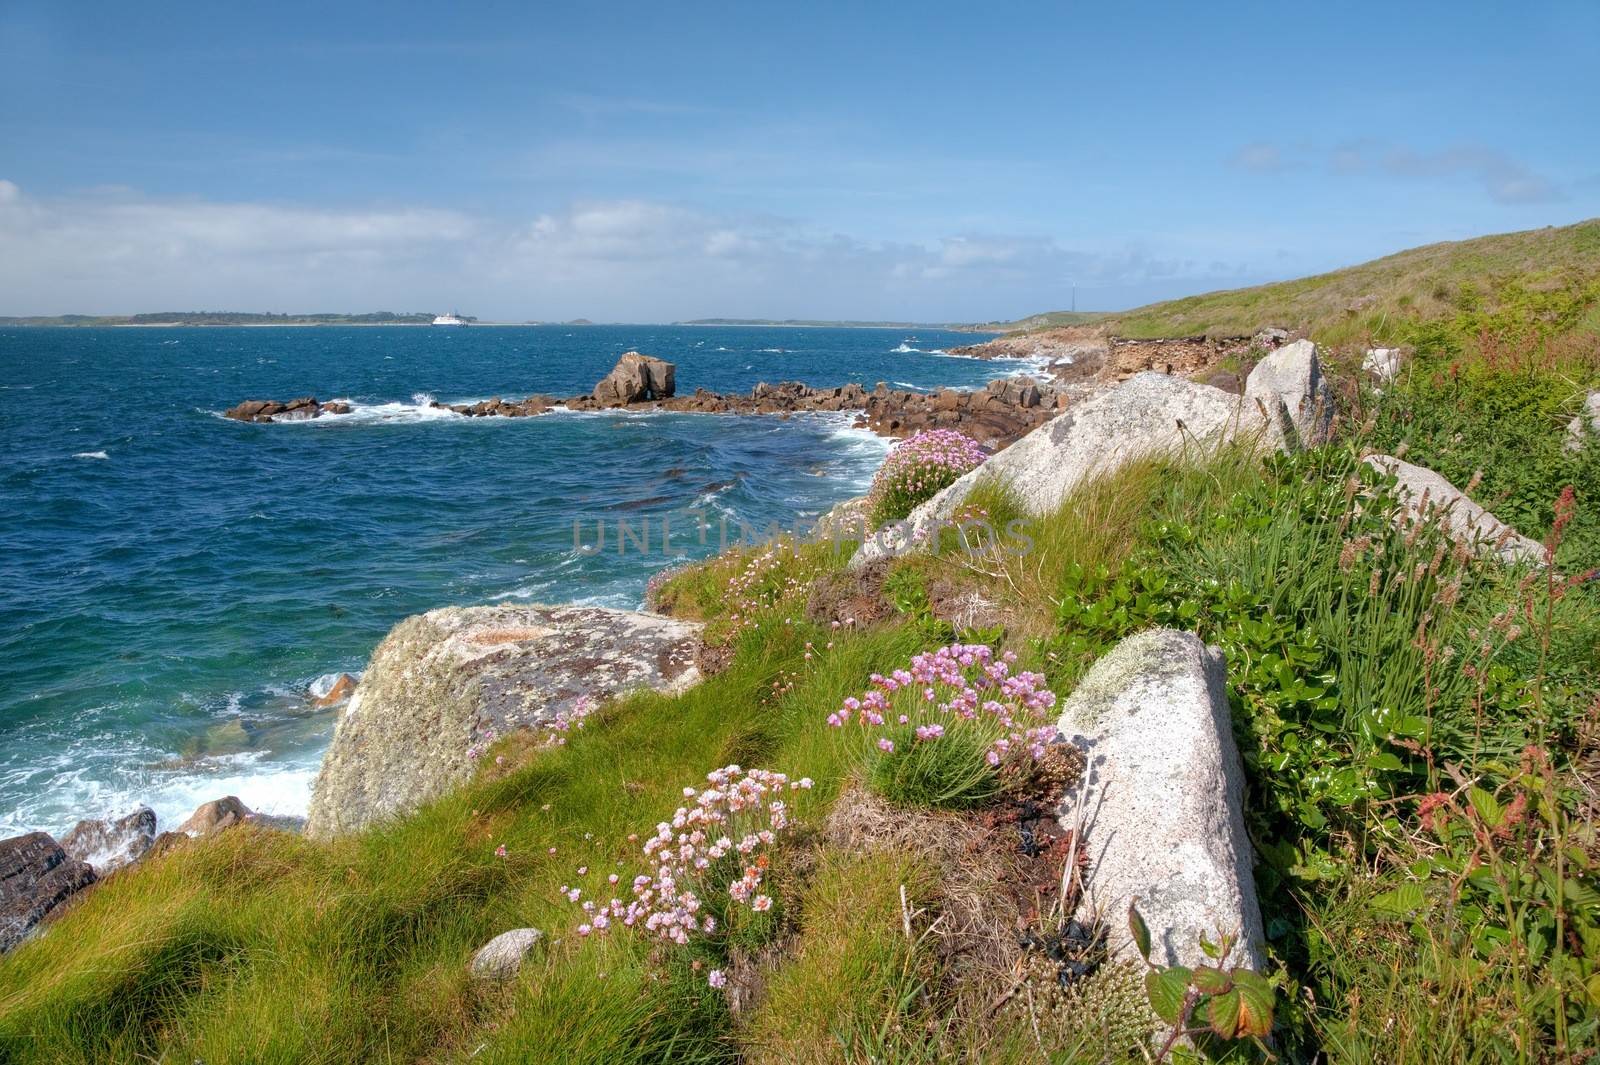 St Mary's, Isles of Scilly by andrewroland